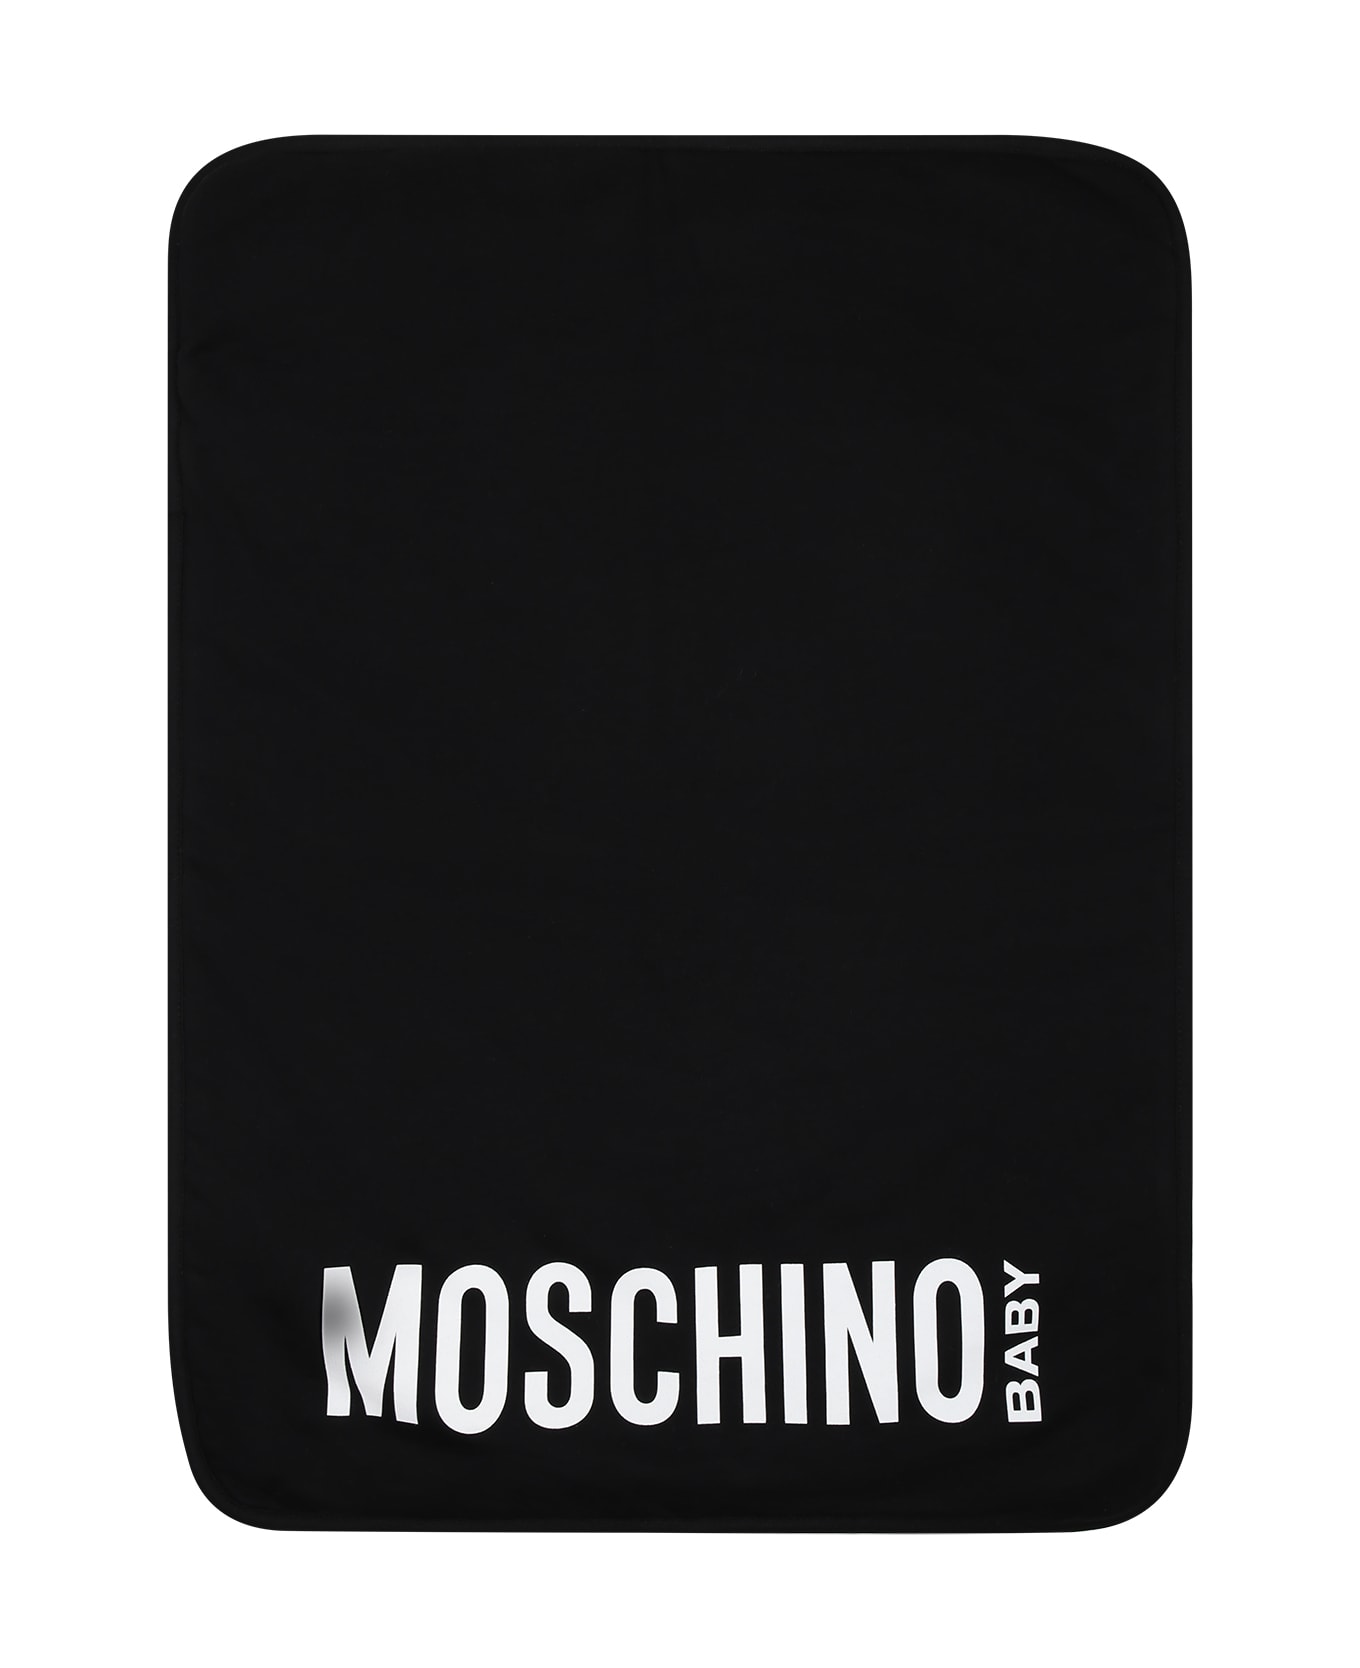 Moschino Black Mother Bag For Babies With Teddy Bear And Logo - Black